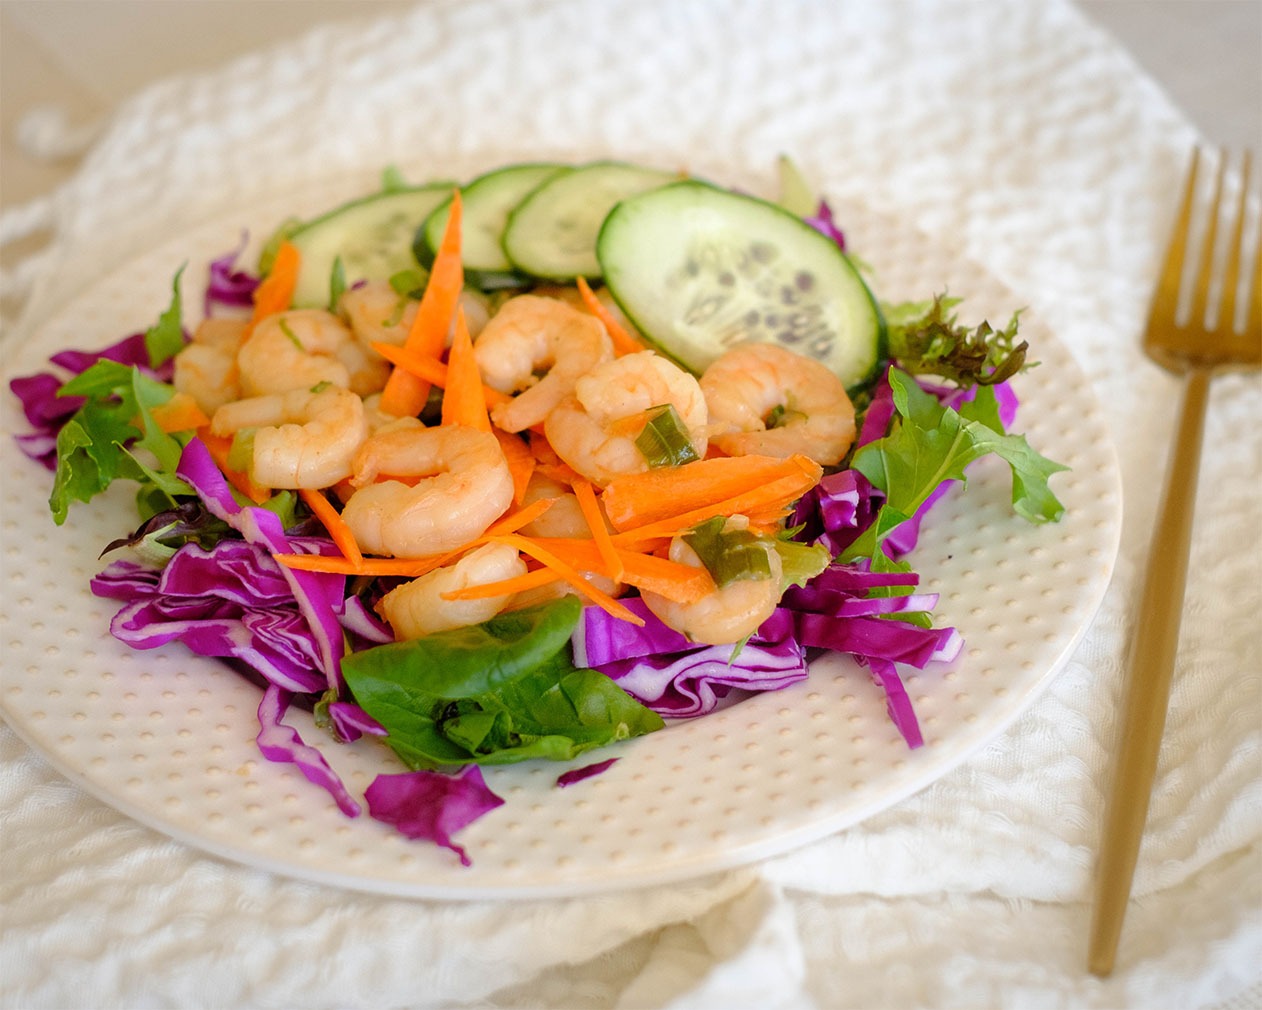 round plate with salad, shrimp, and cucumbers, and carrots, and purple cabbage